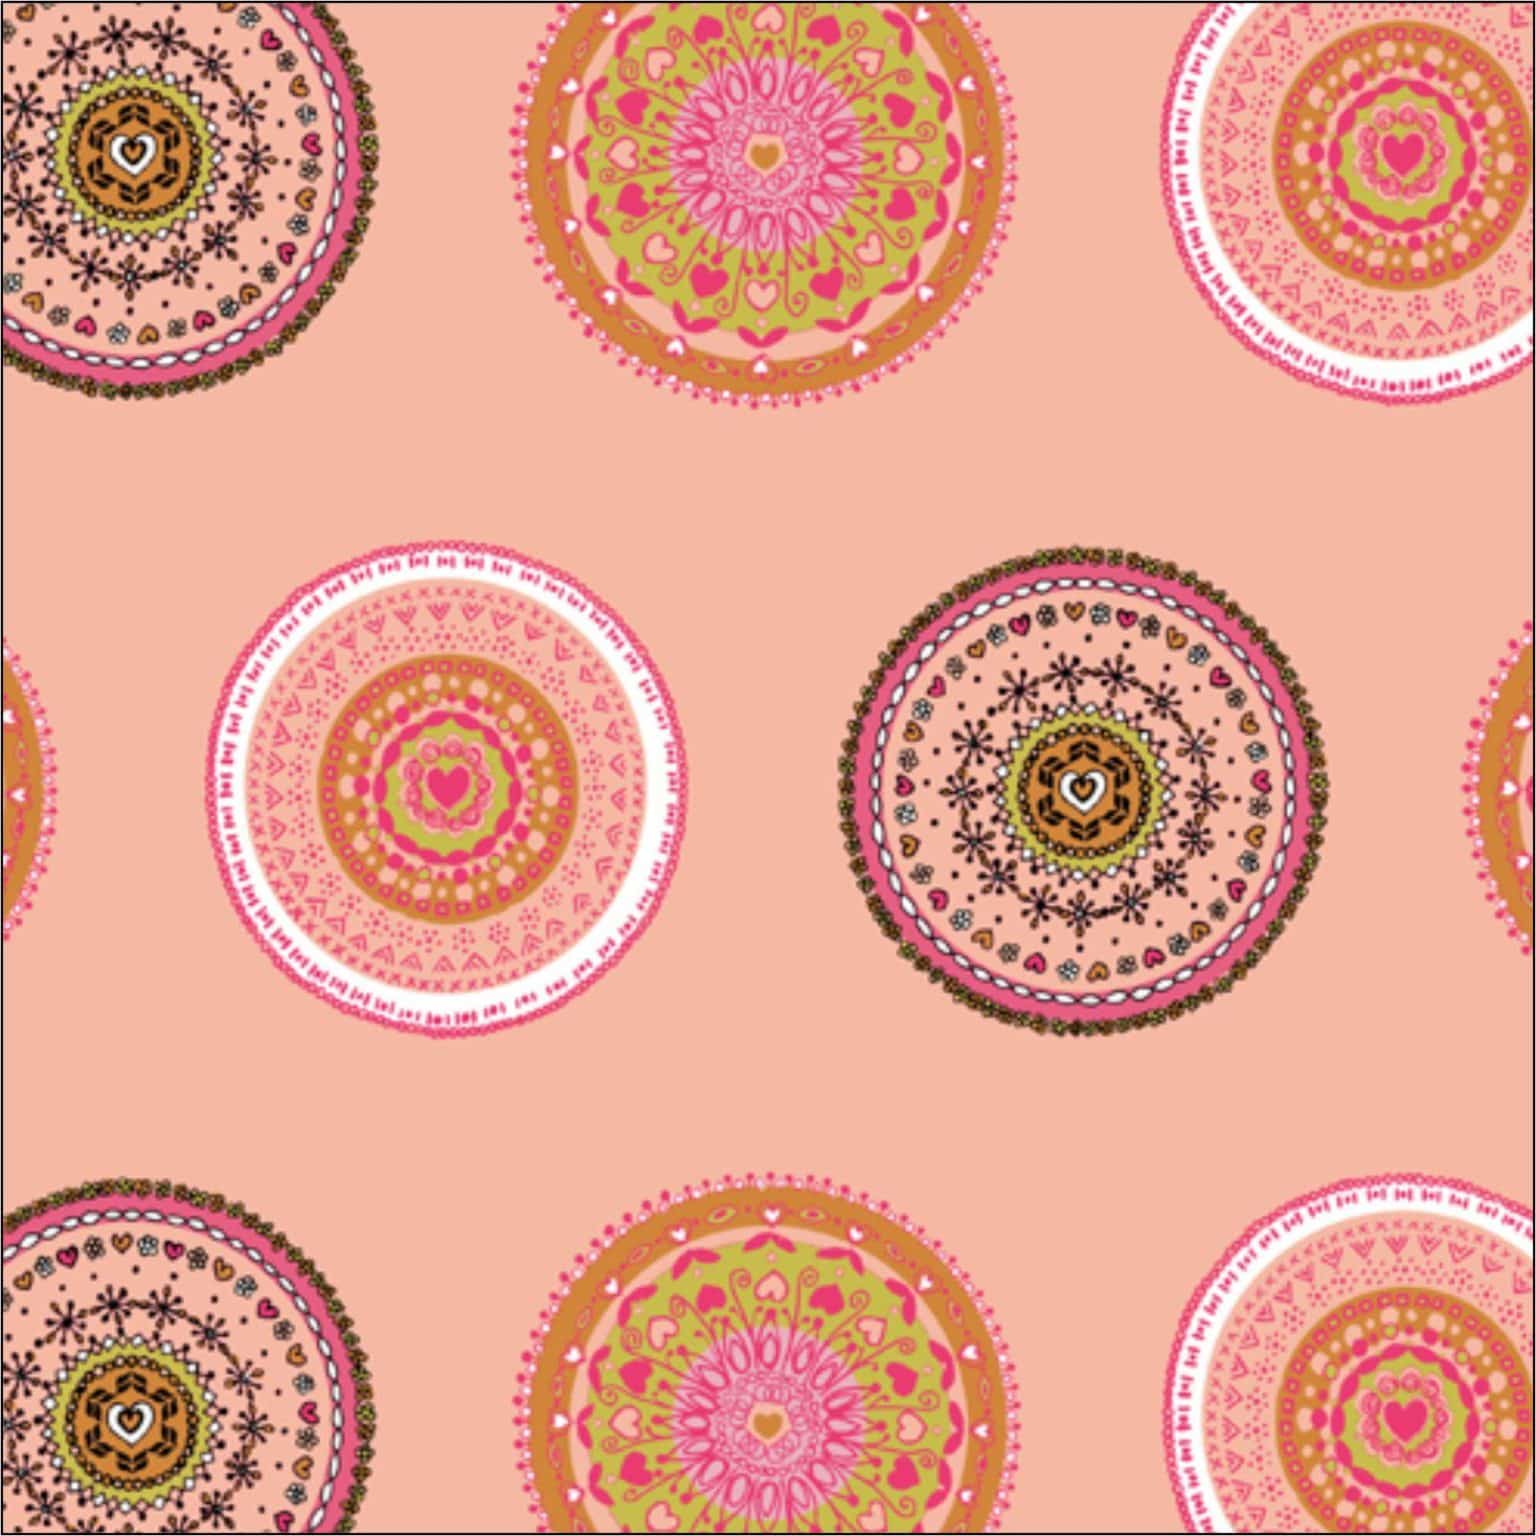 Dressmaking Fabric | Folk Applique on Peachy Pink Cotton | More Sewing